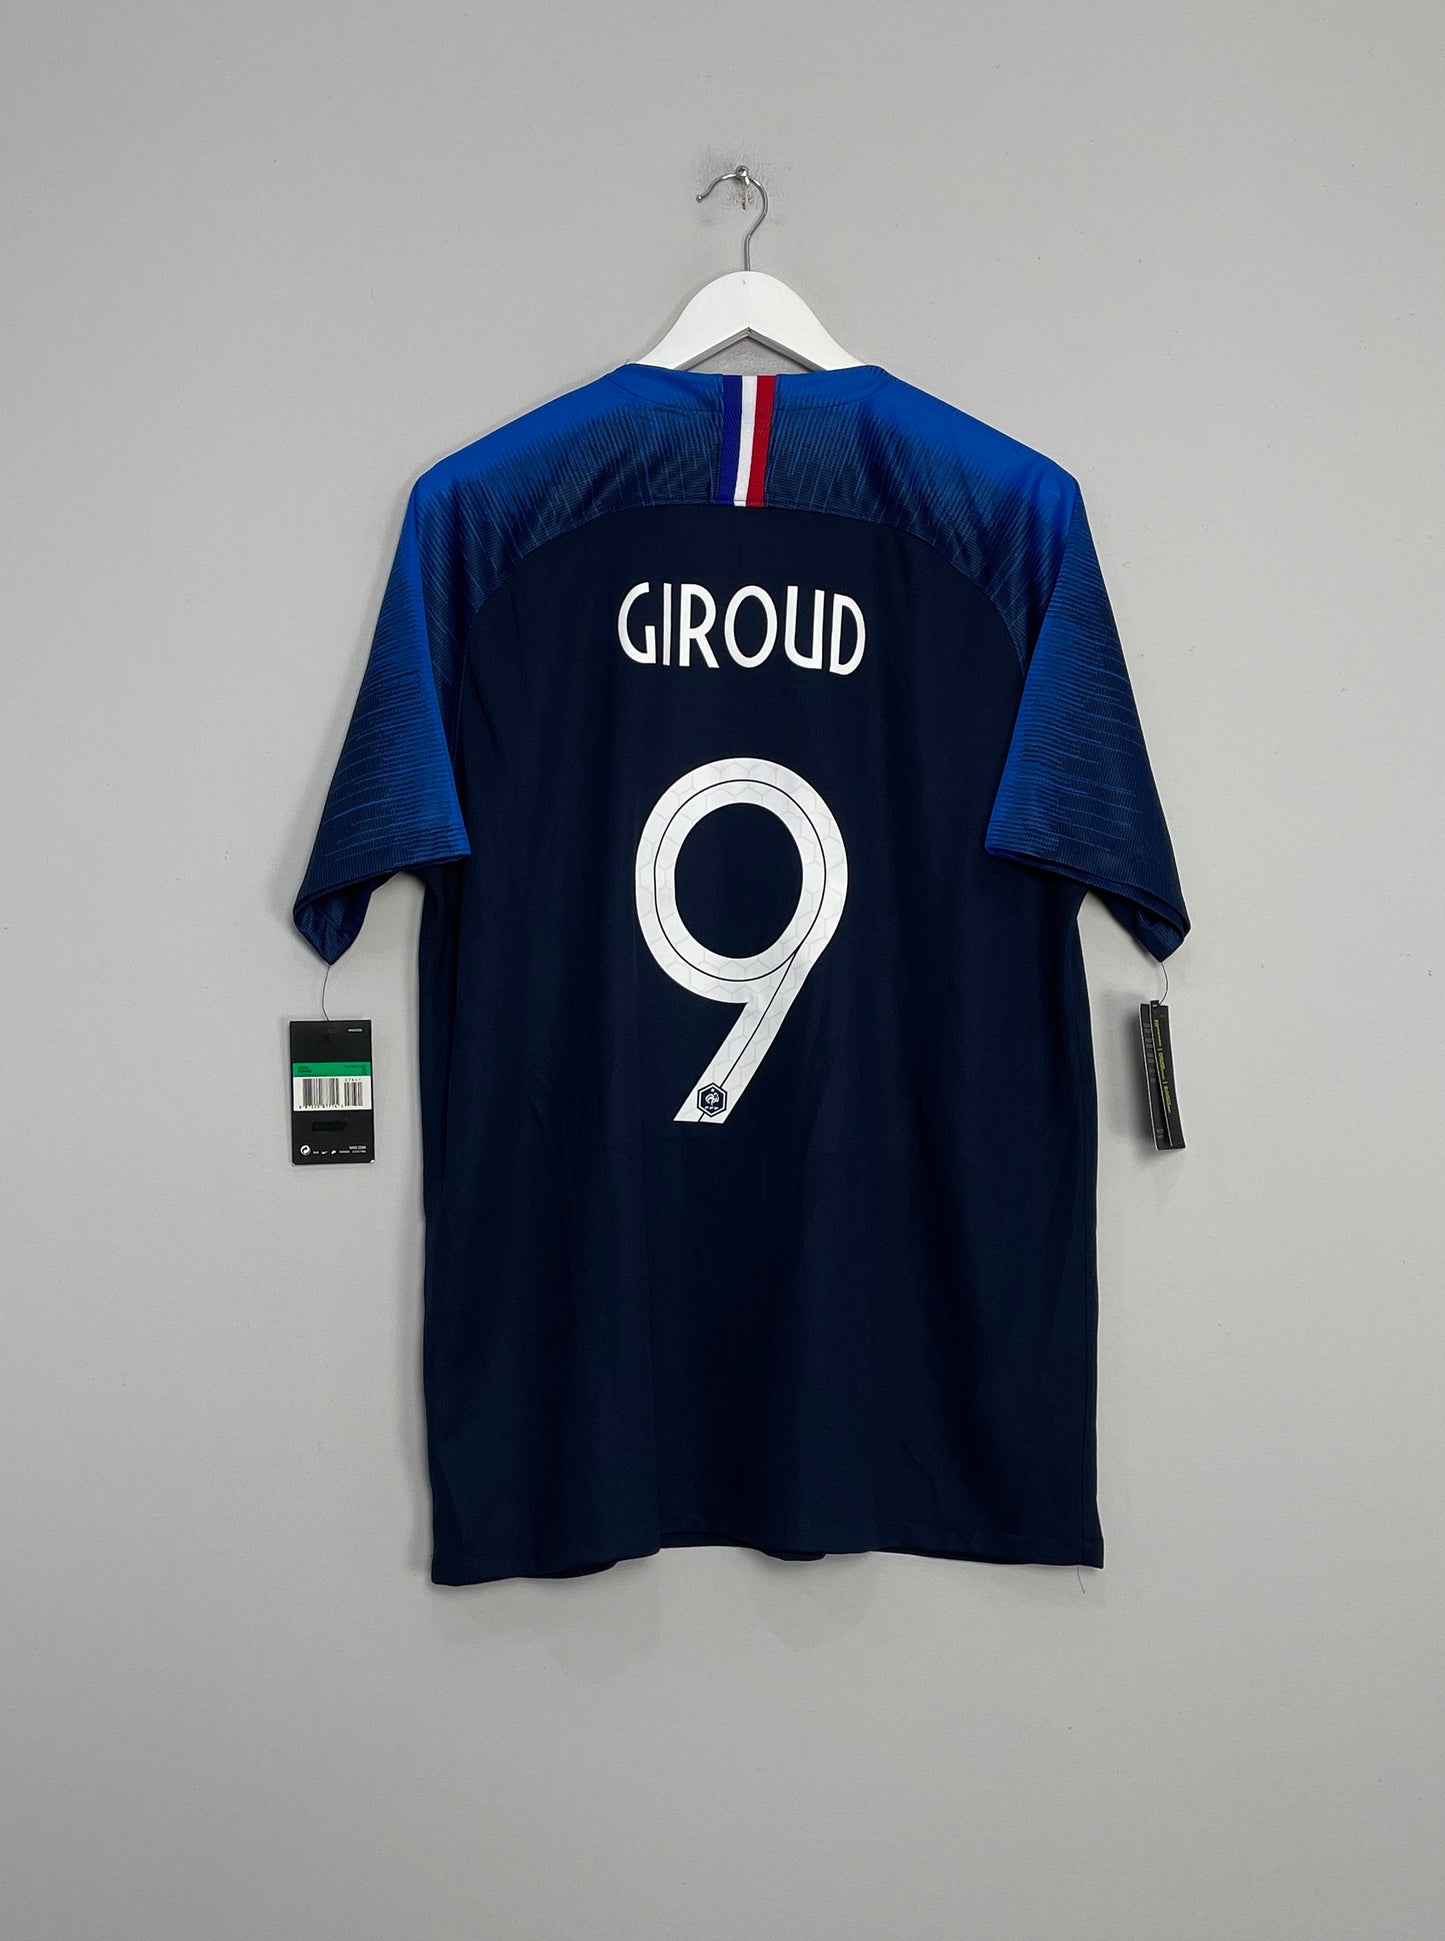 Image of the France Giroud shirt from the 2018/20 season